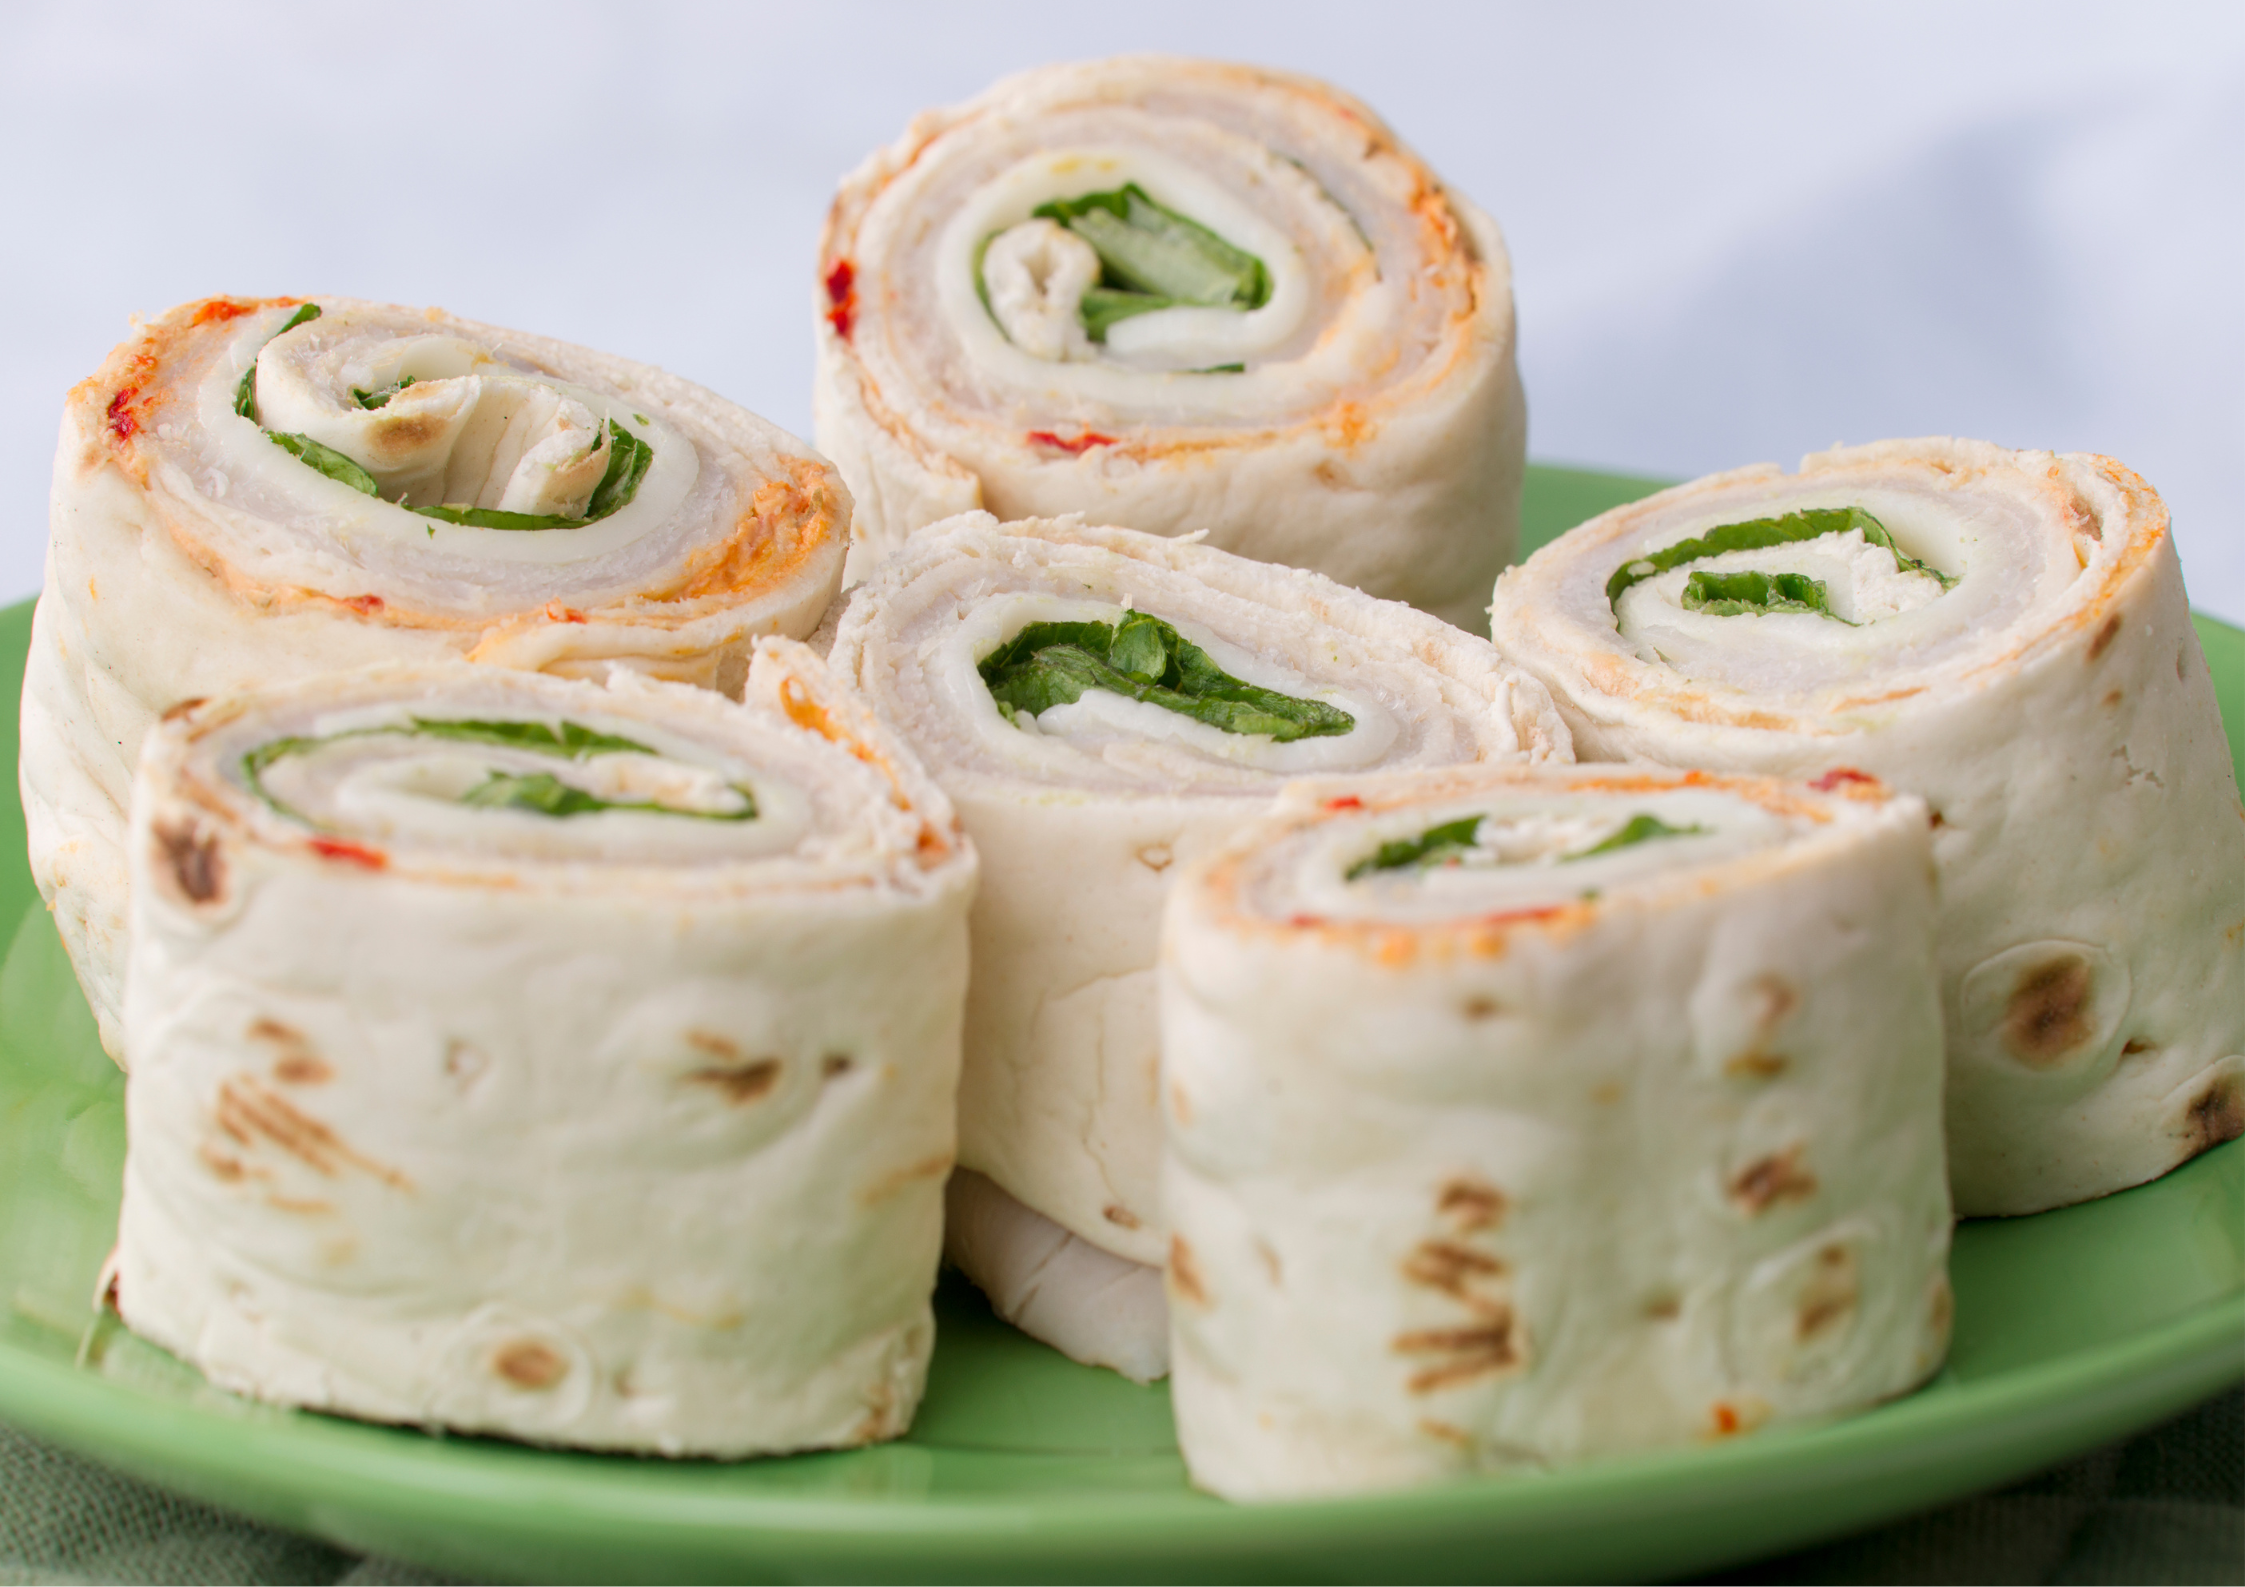 6 turkey, cheese and spinach pinwheels wrapped in tortilla shells on a green plate.